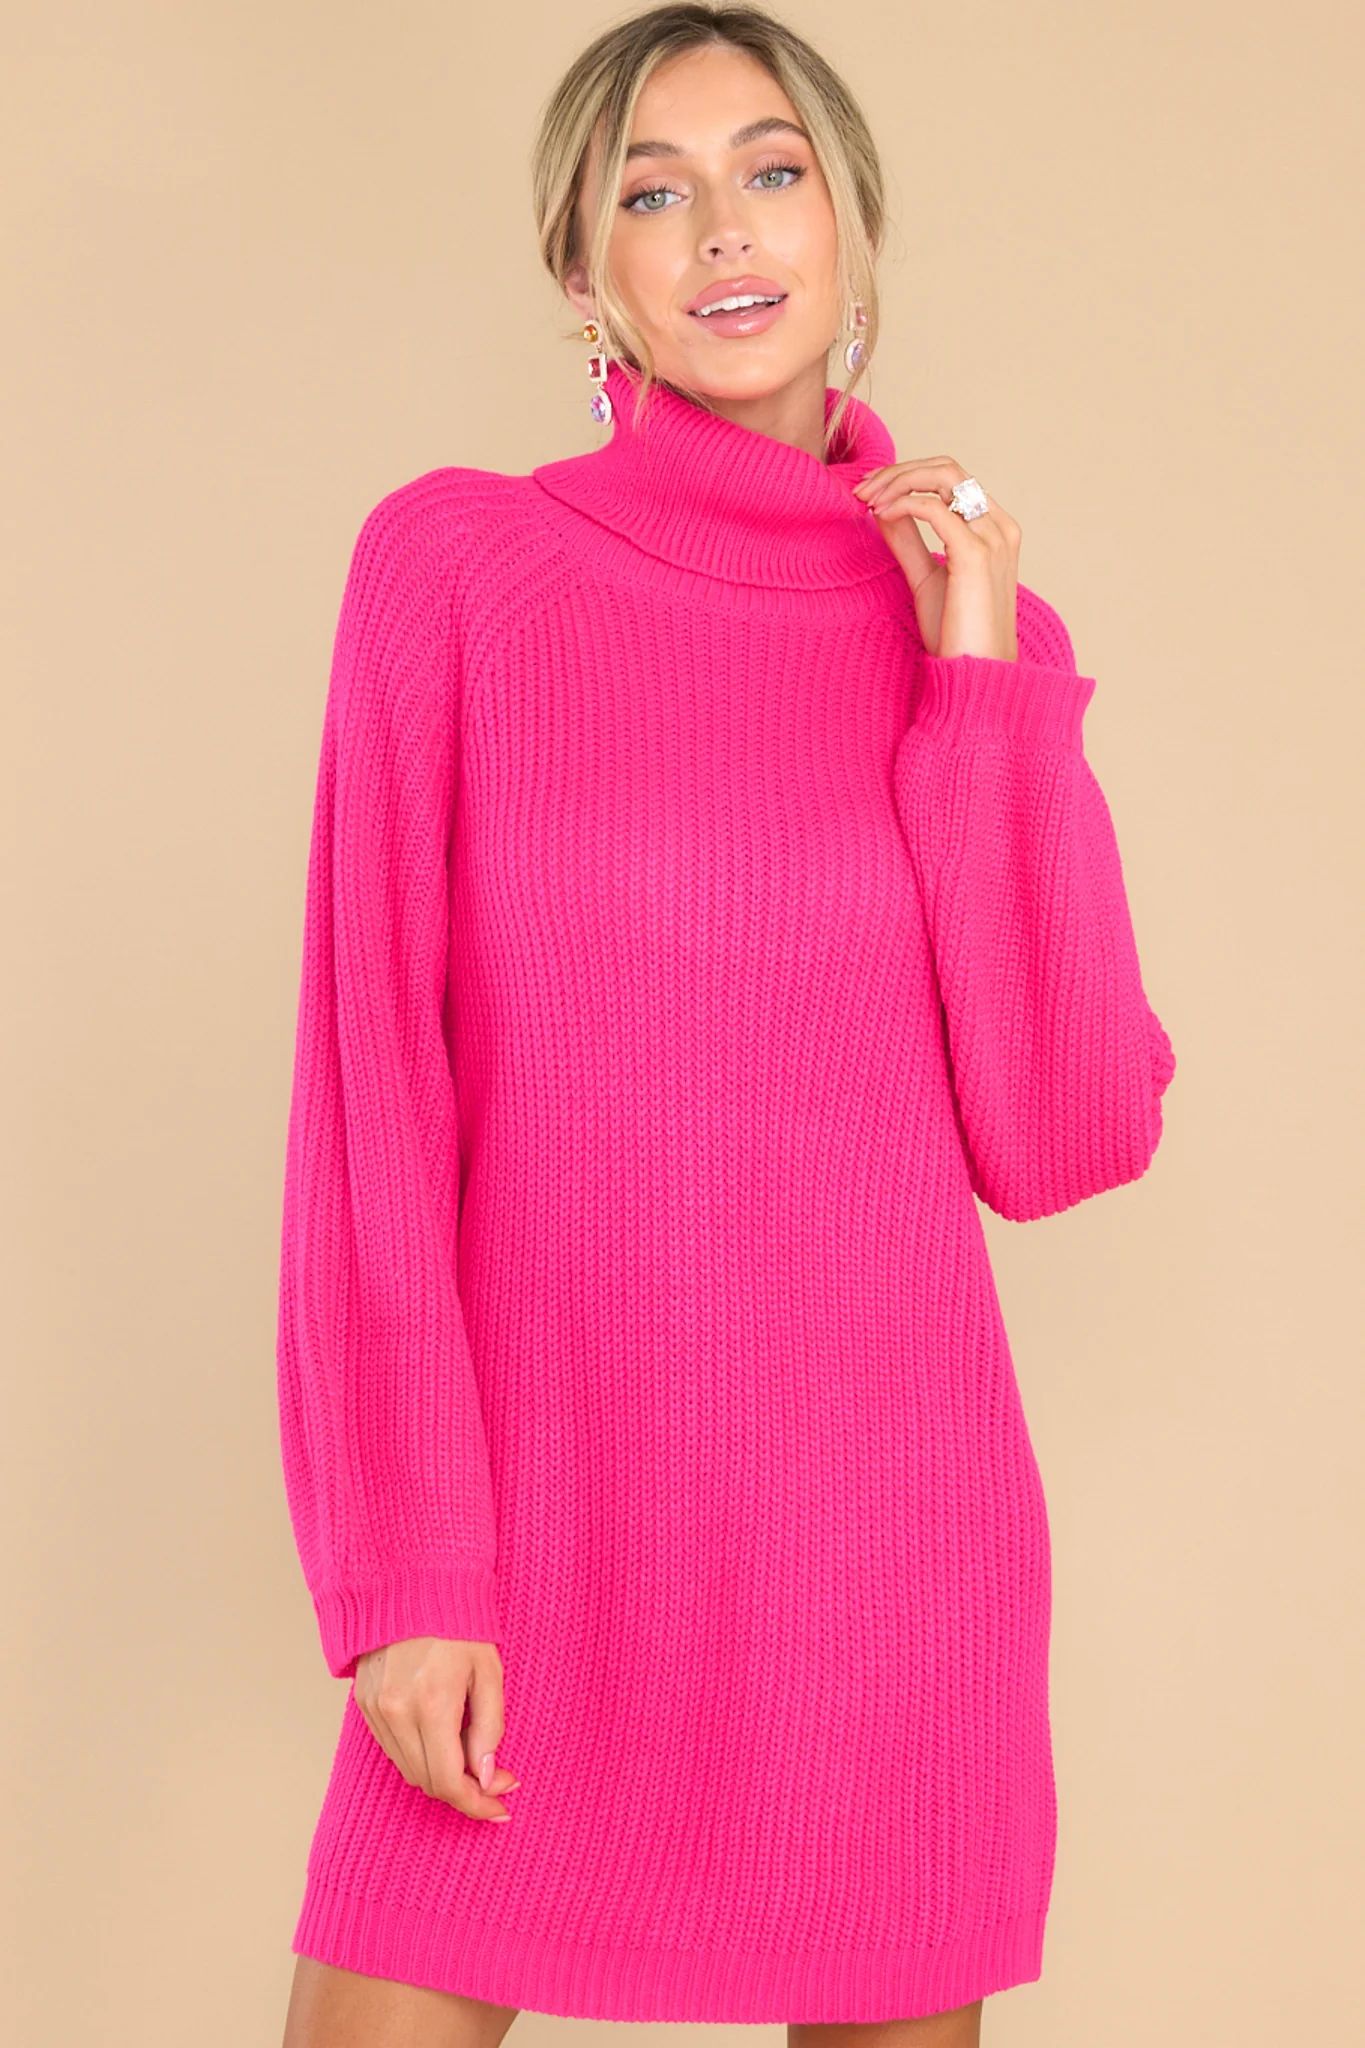 On My Way Up Hot Pink Sweater Dress | Red Dress 